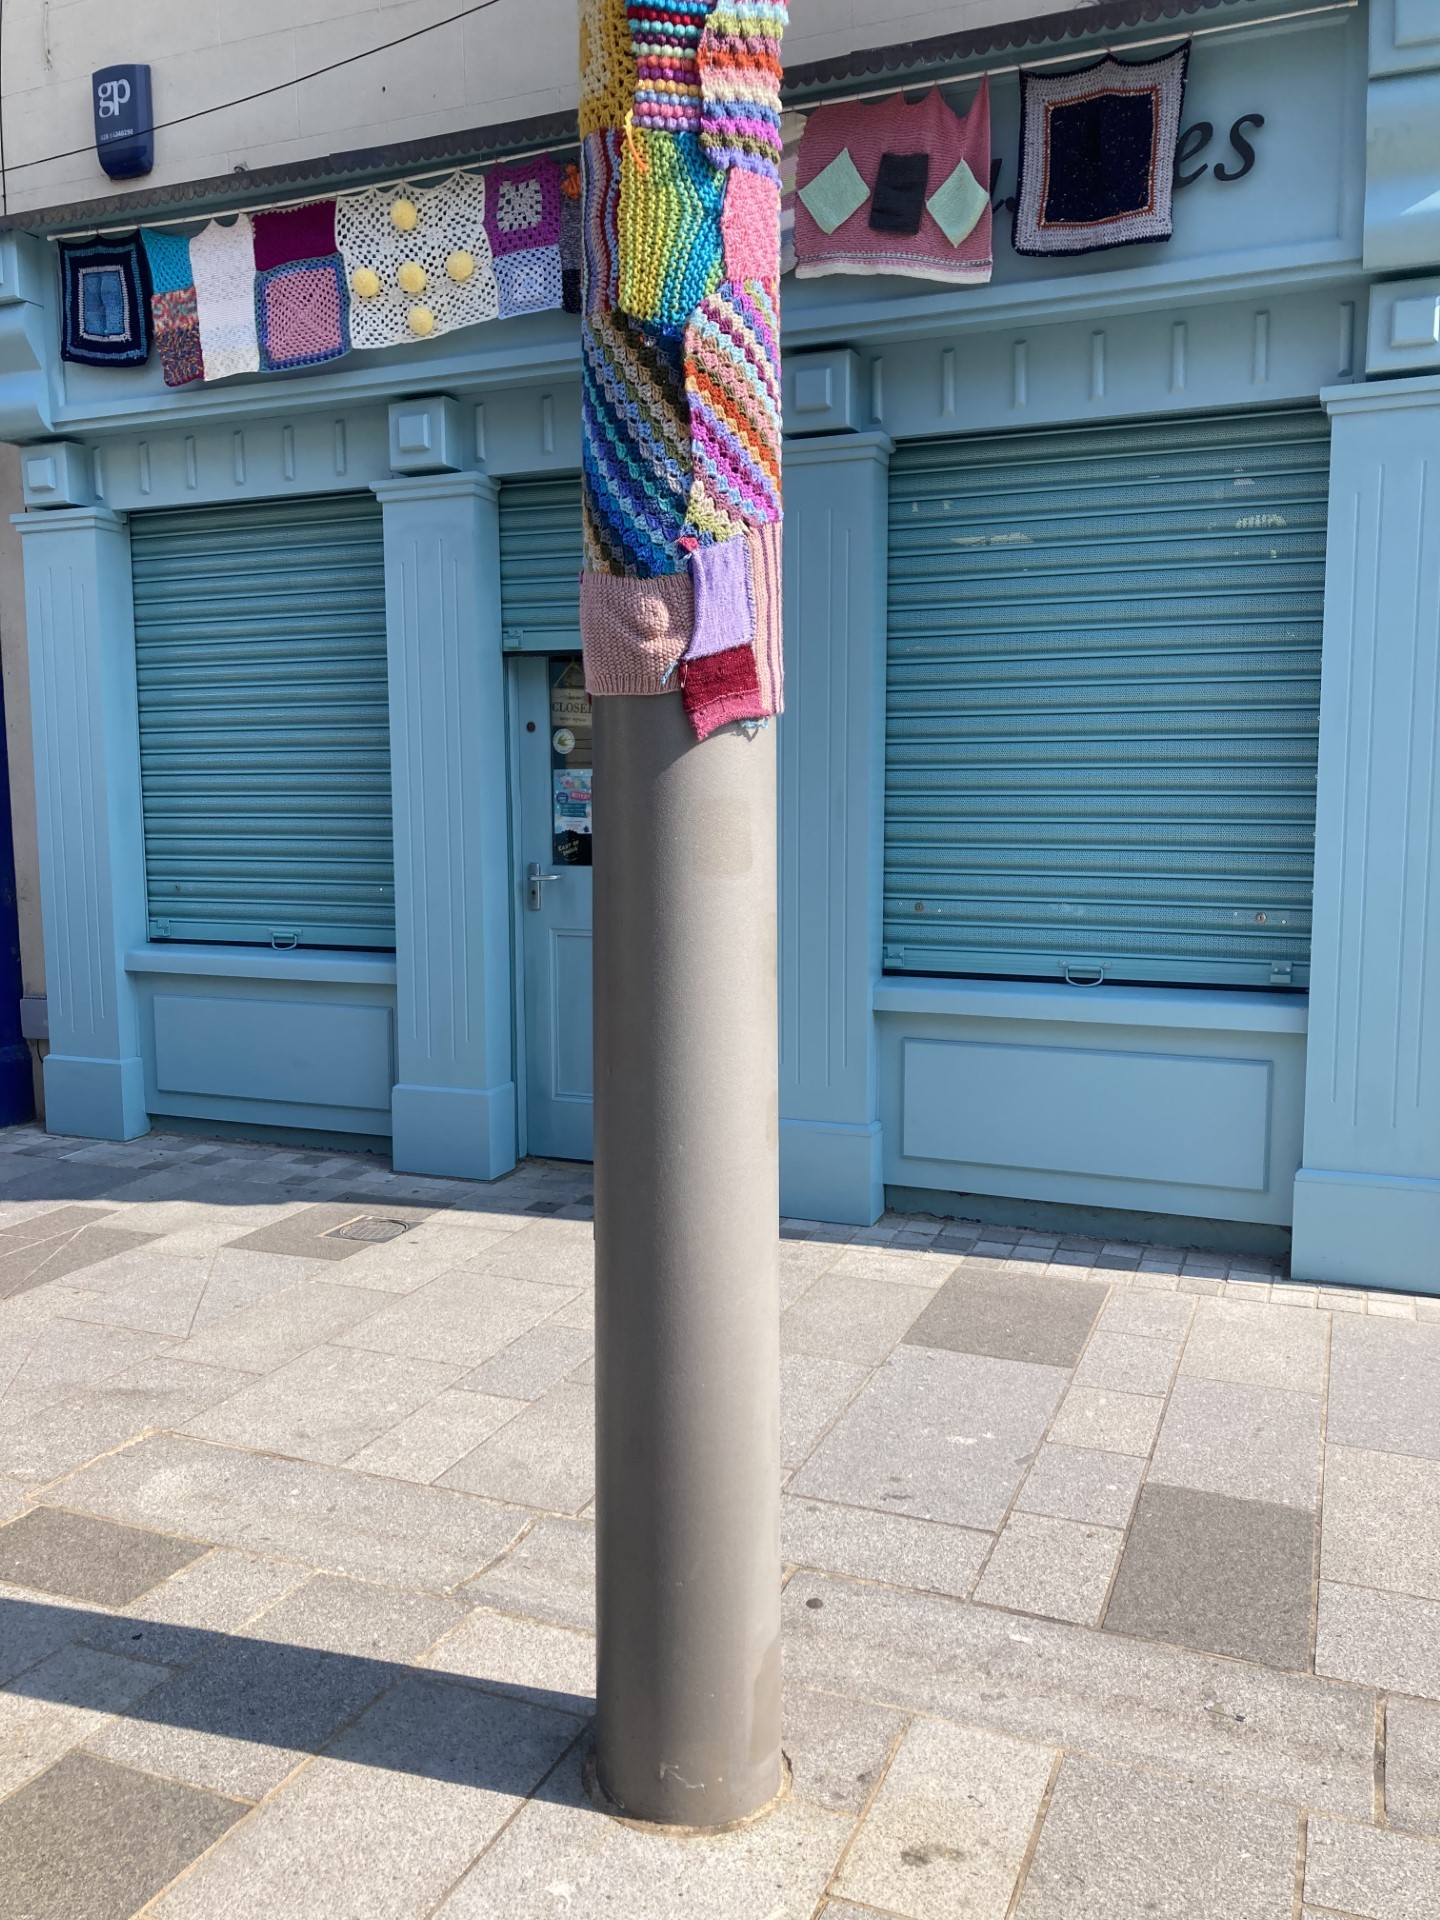 Knitted and crocheted pieces that adorned the lamp post outside Fermanagh Cottage Industries as part of a yarnbombing project have been stolen.